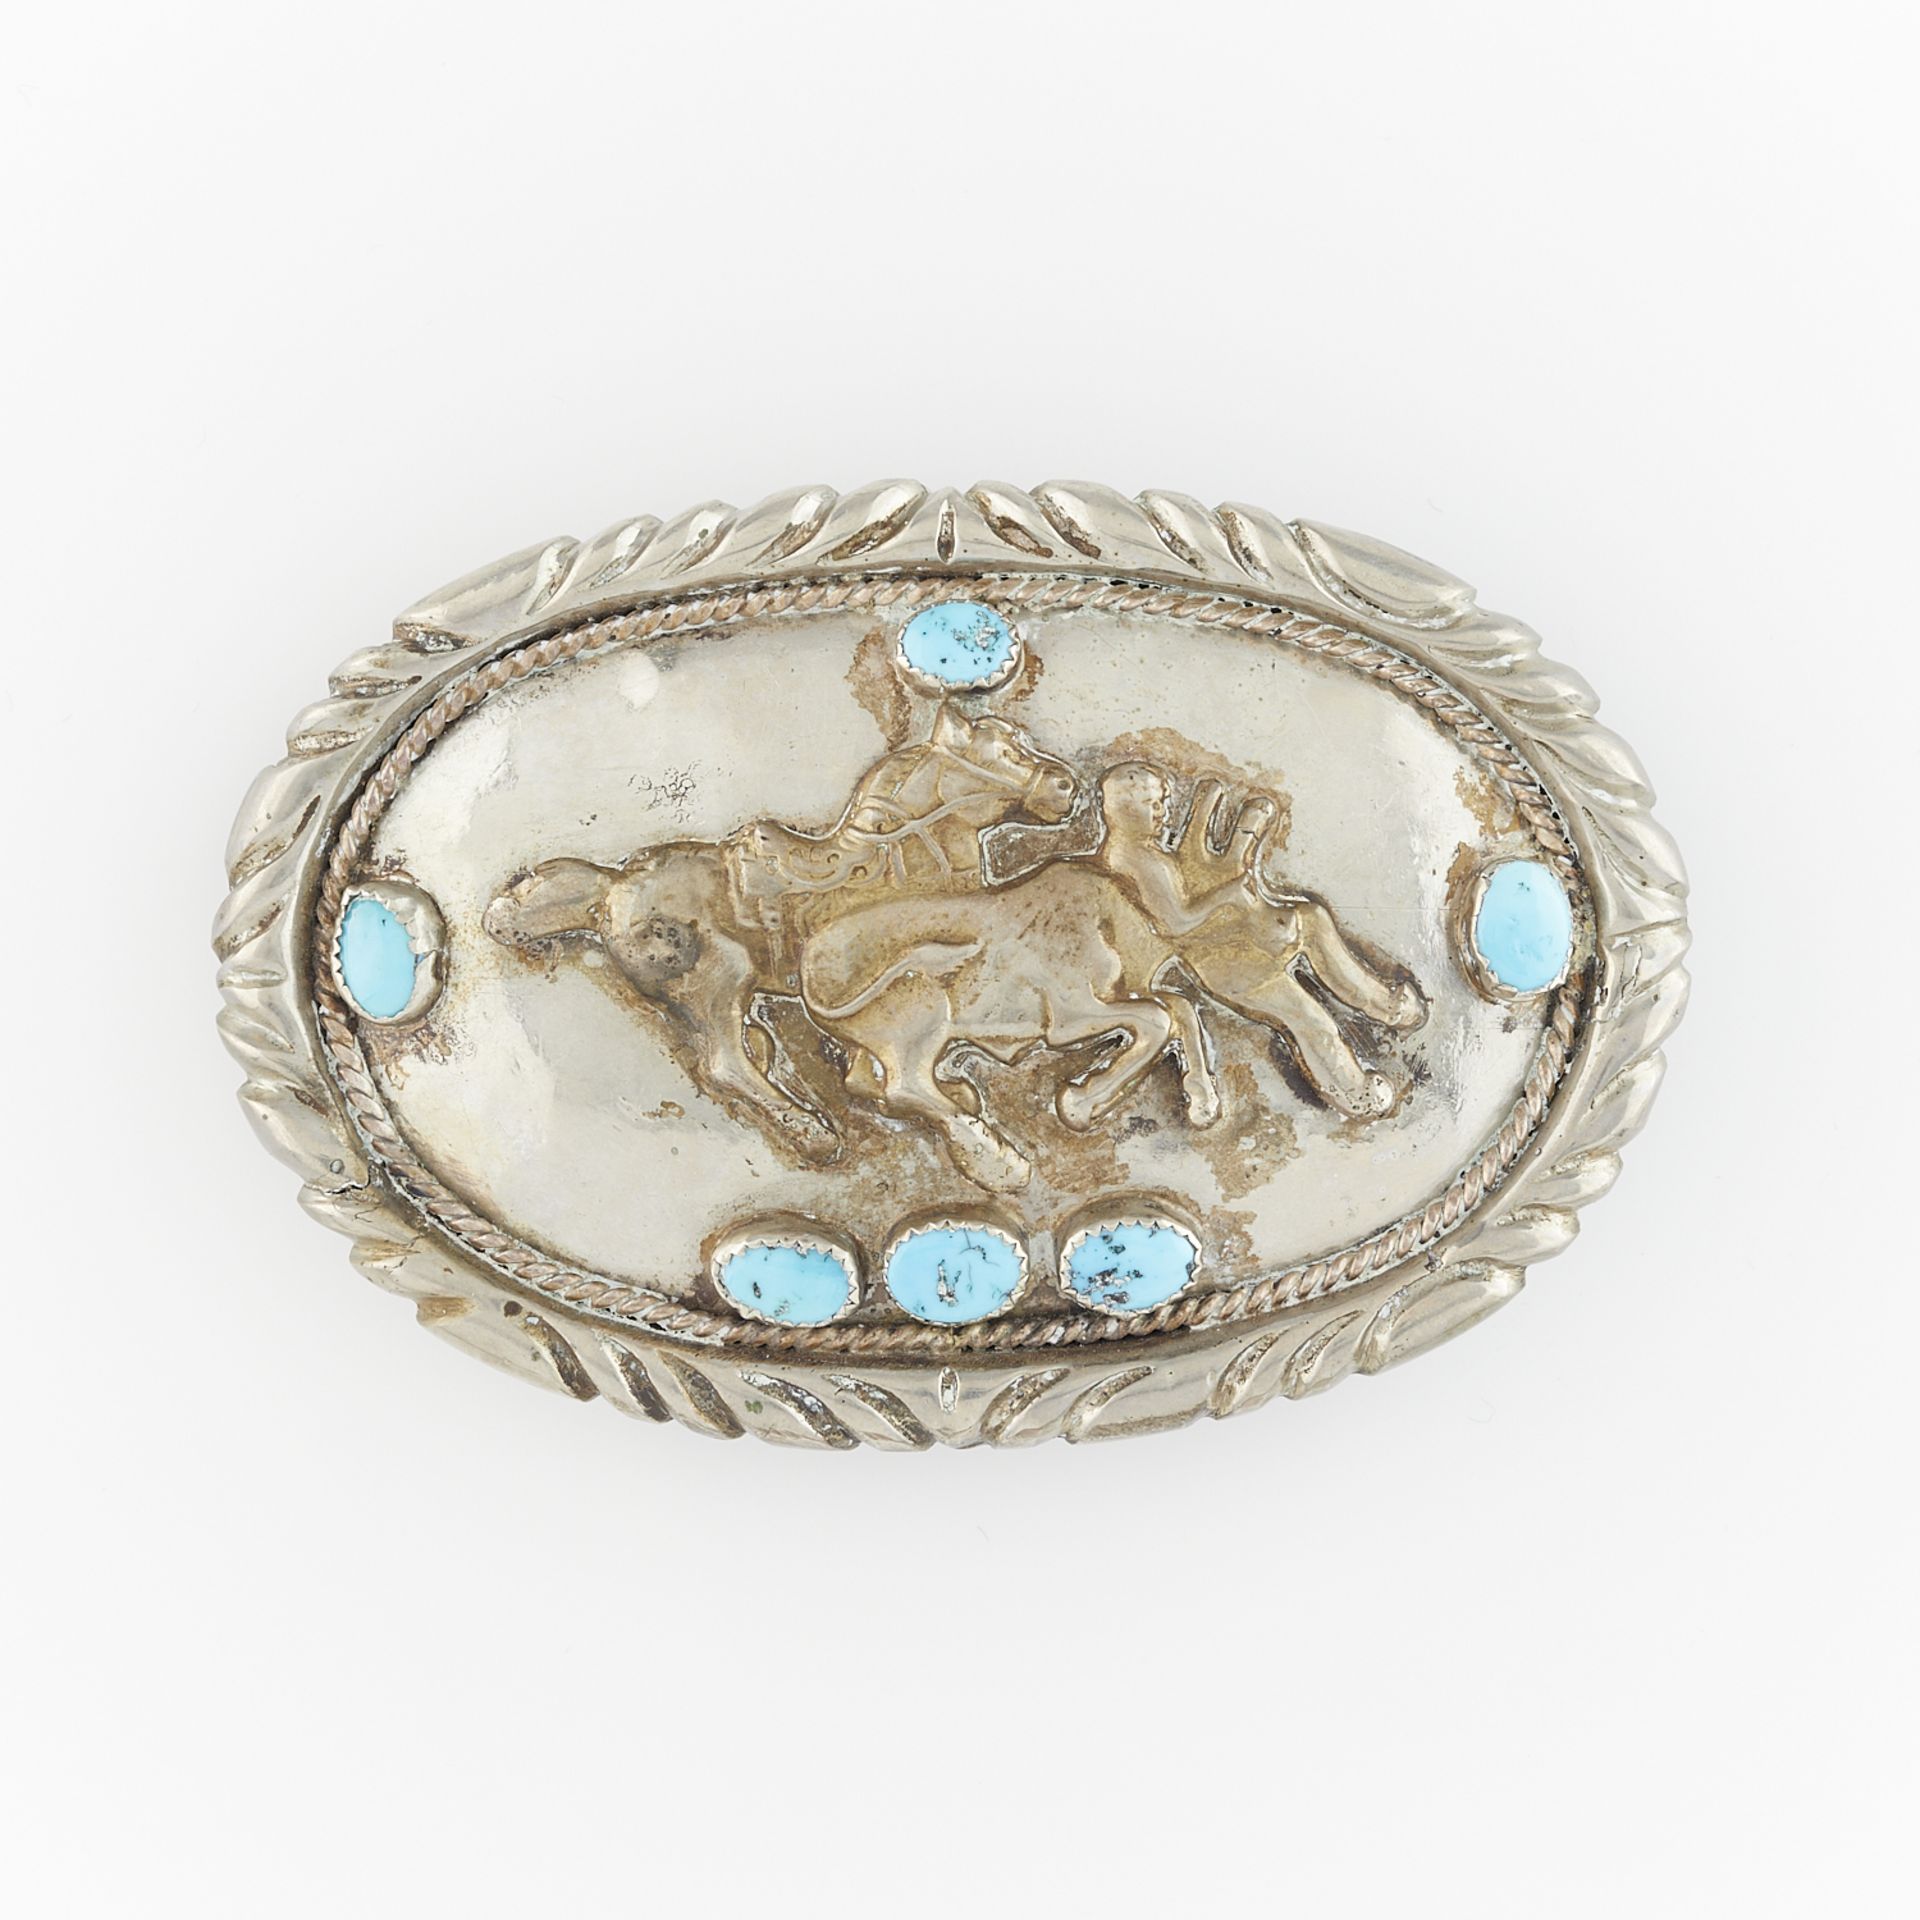 Rodeo Belt Buckle with Turquoise - Image 2 of 6